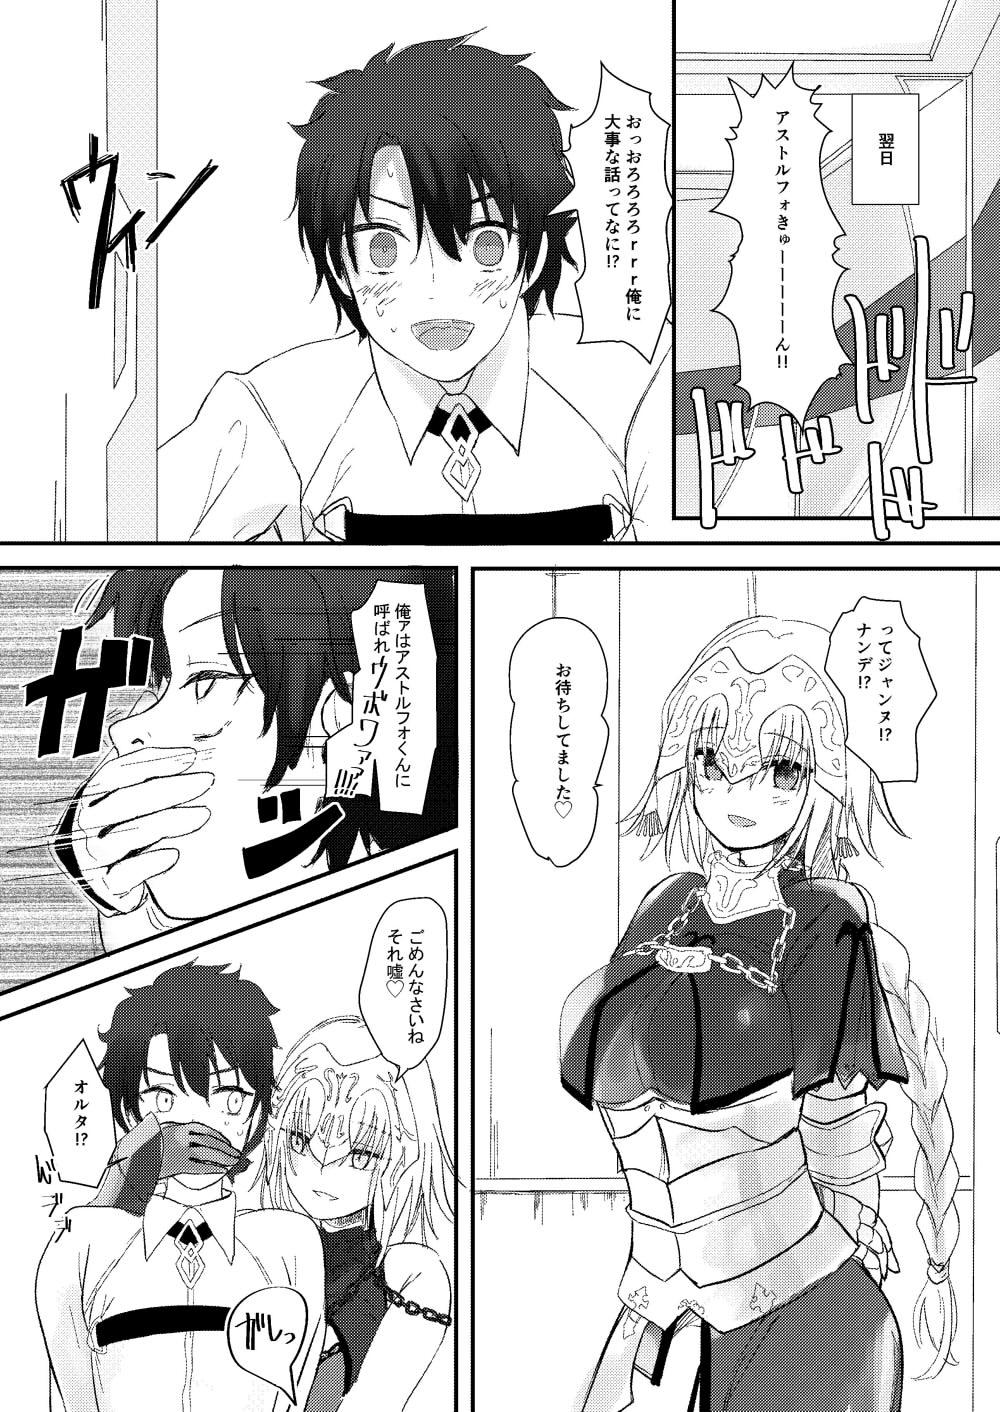 Zorra Jeanne to Boku to Jeanne - Fate grand order Shorts - Page 4